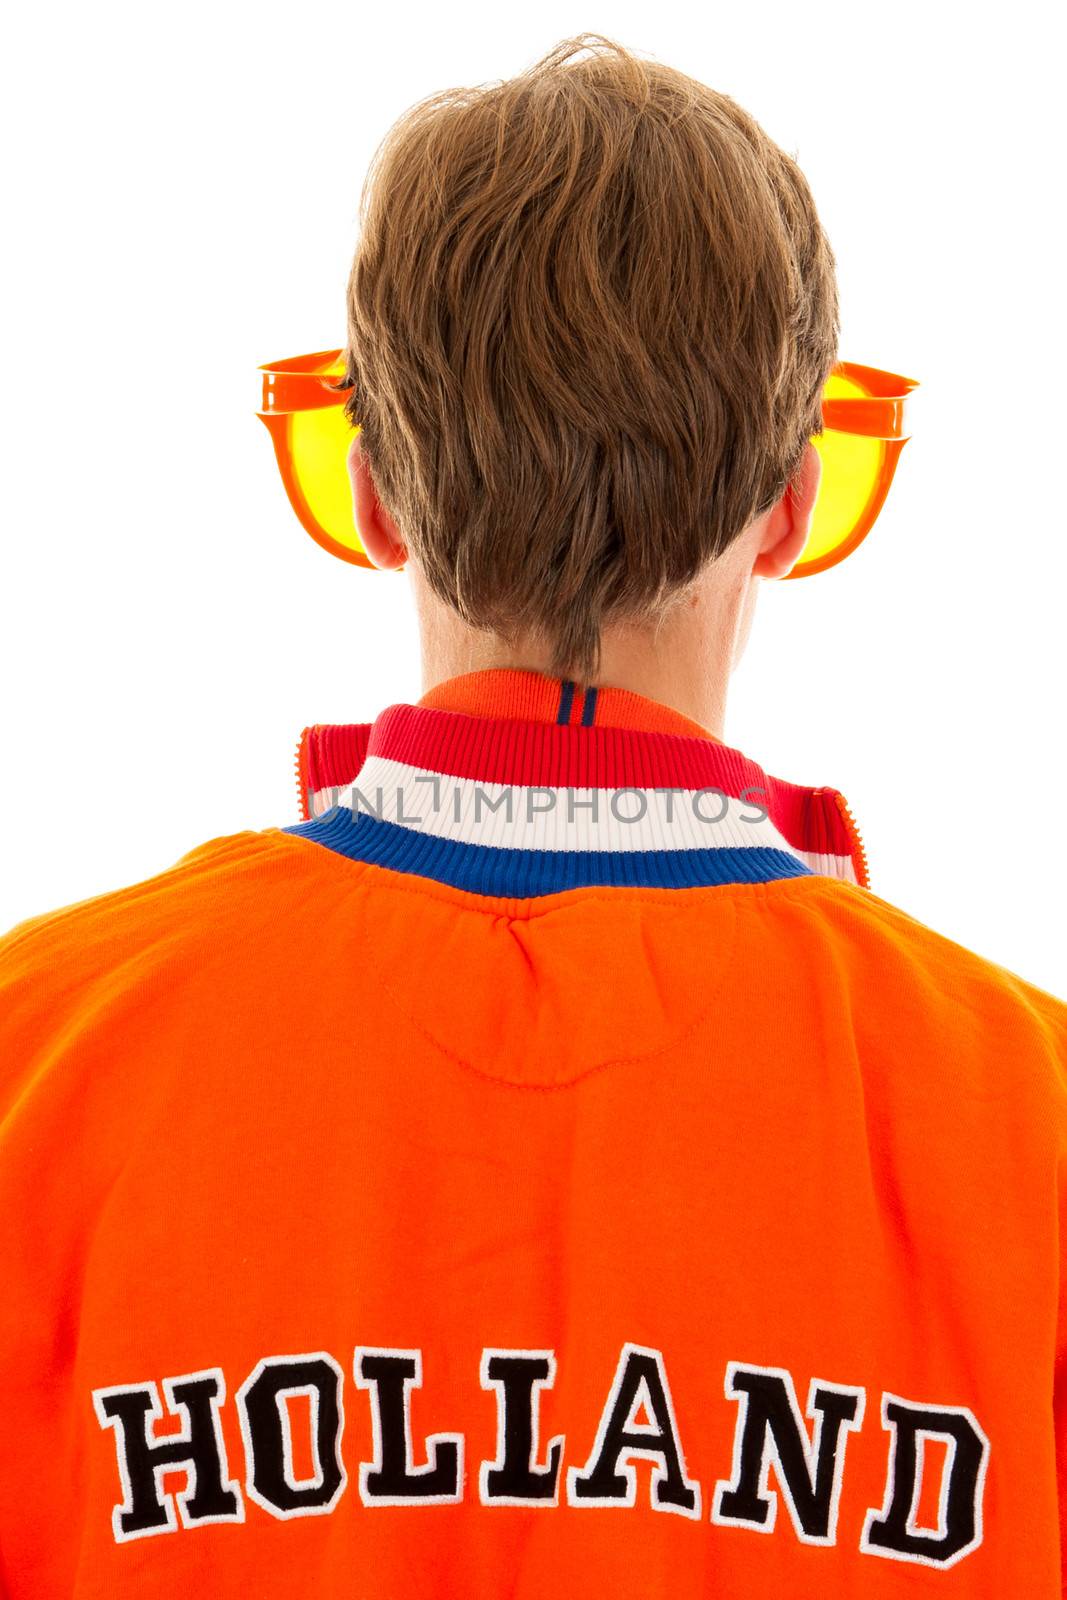 the back of  a supporter of the dutch soccer team